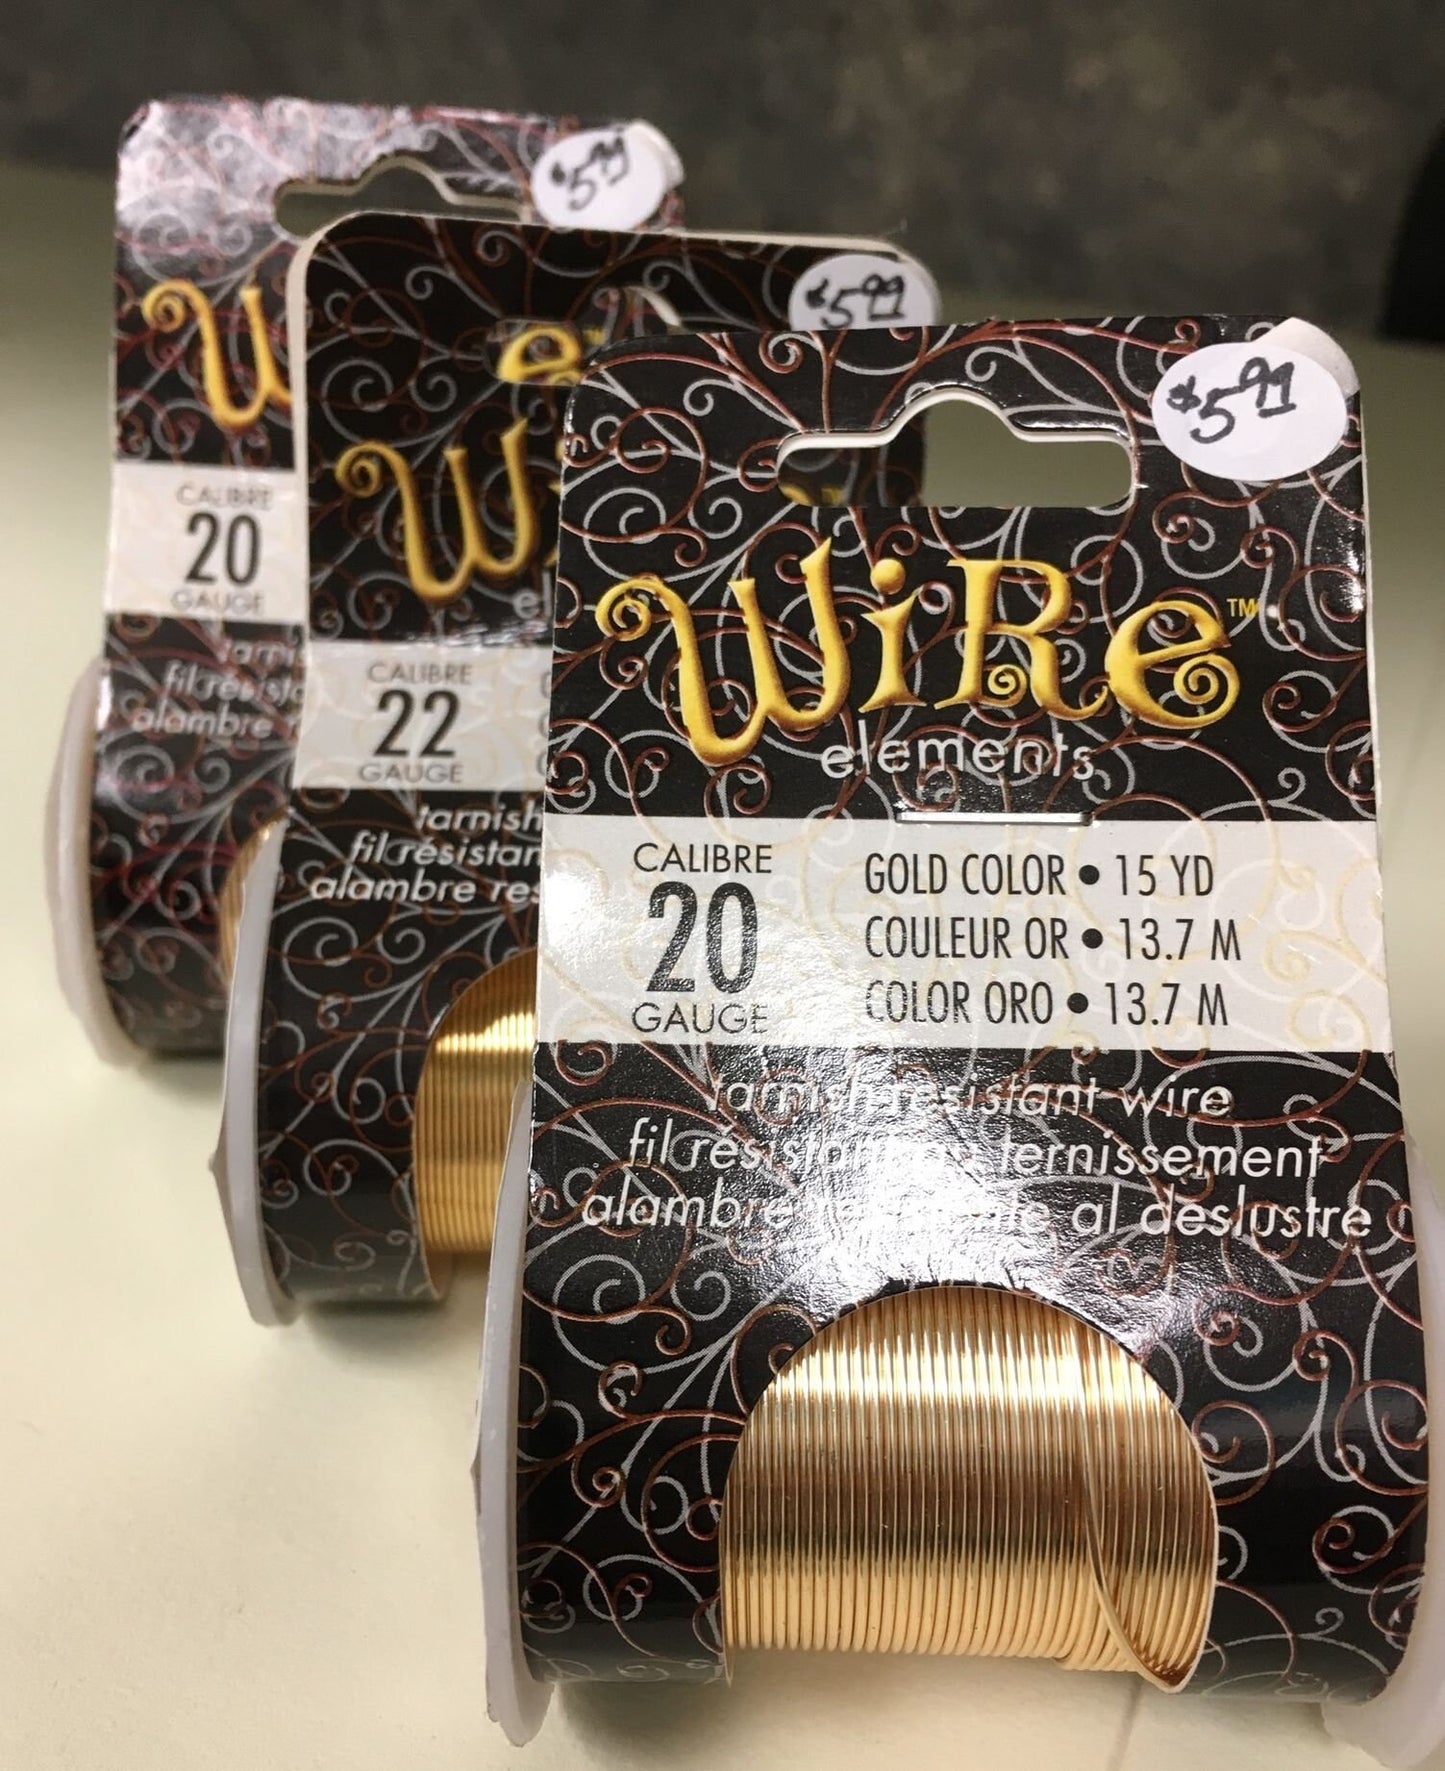 Beading Wire, Beadsmith Craft Wire Tarnish Resistant, Silver, Copper, Gold, Ant. copper, Vintage Bronze 18,20, 22, 24, 26 ga.